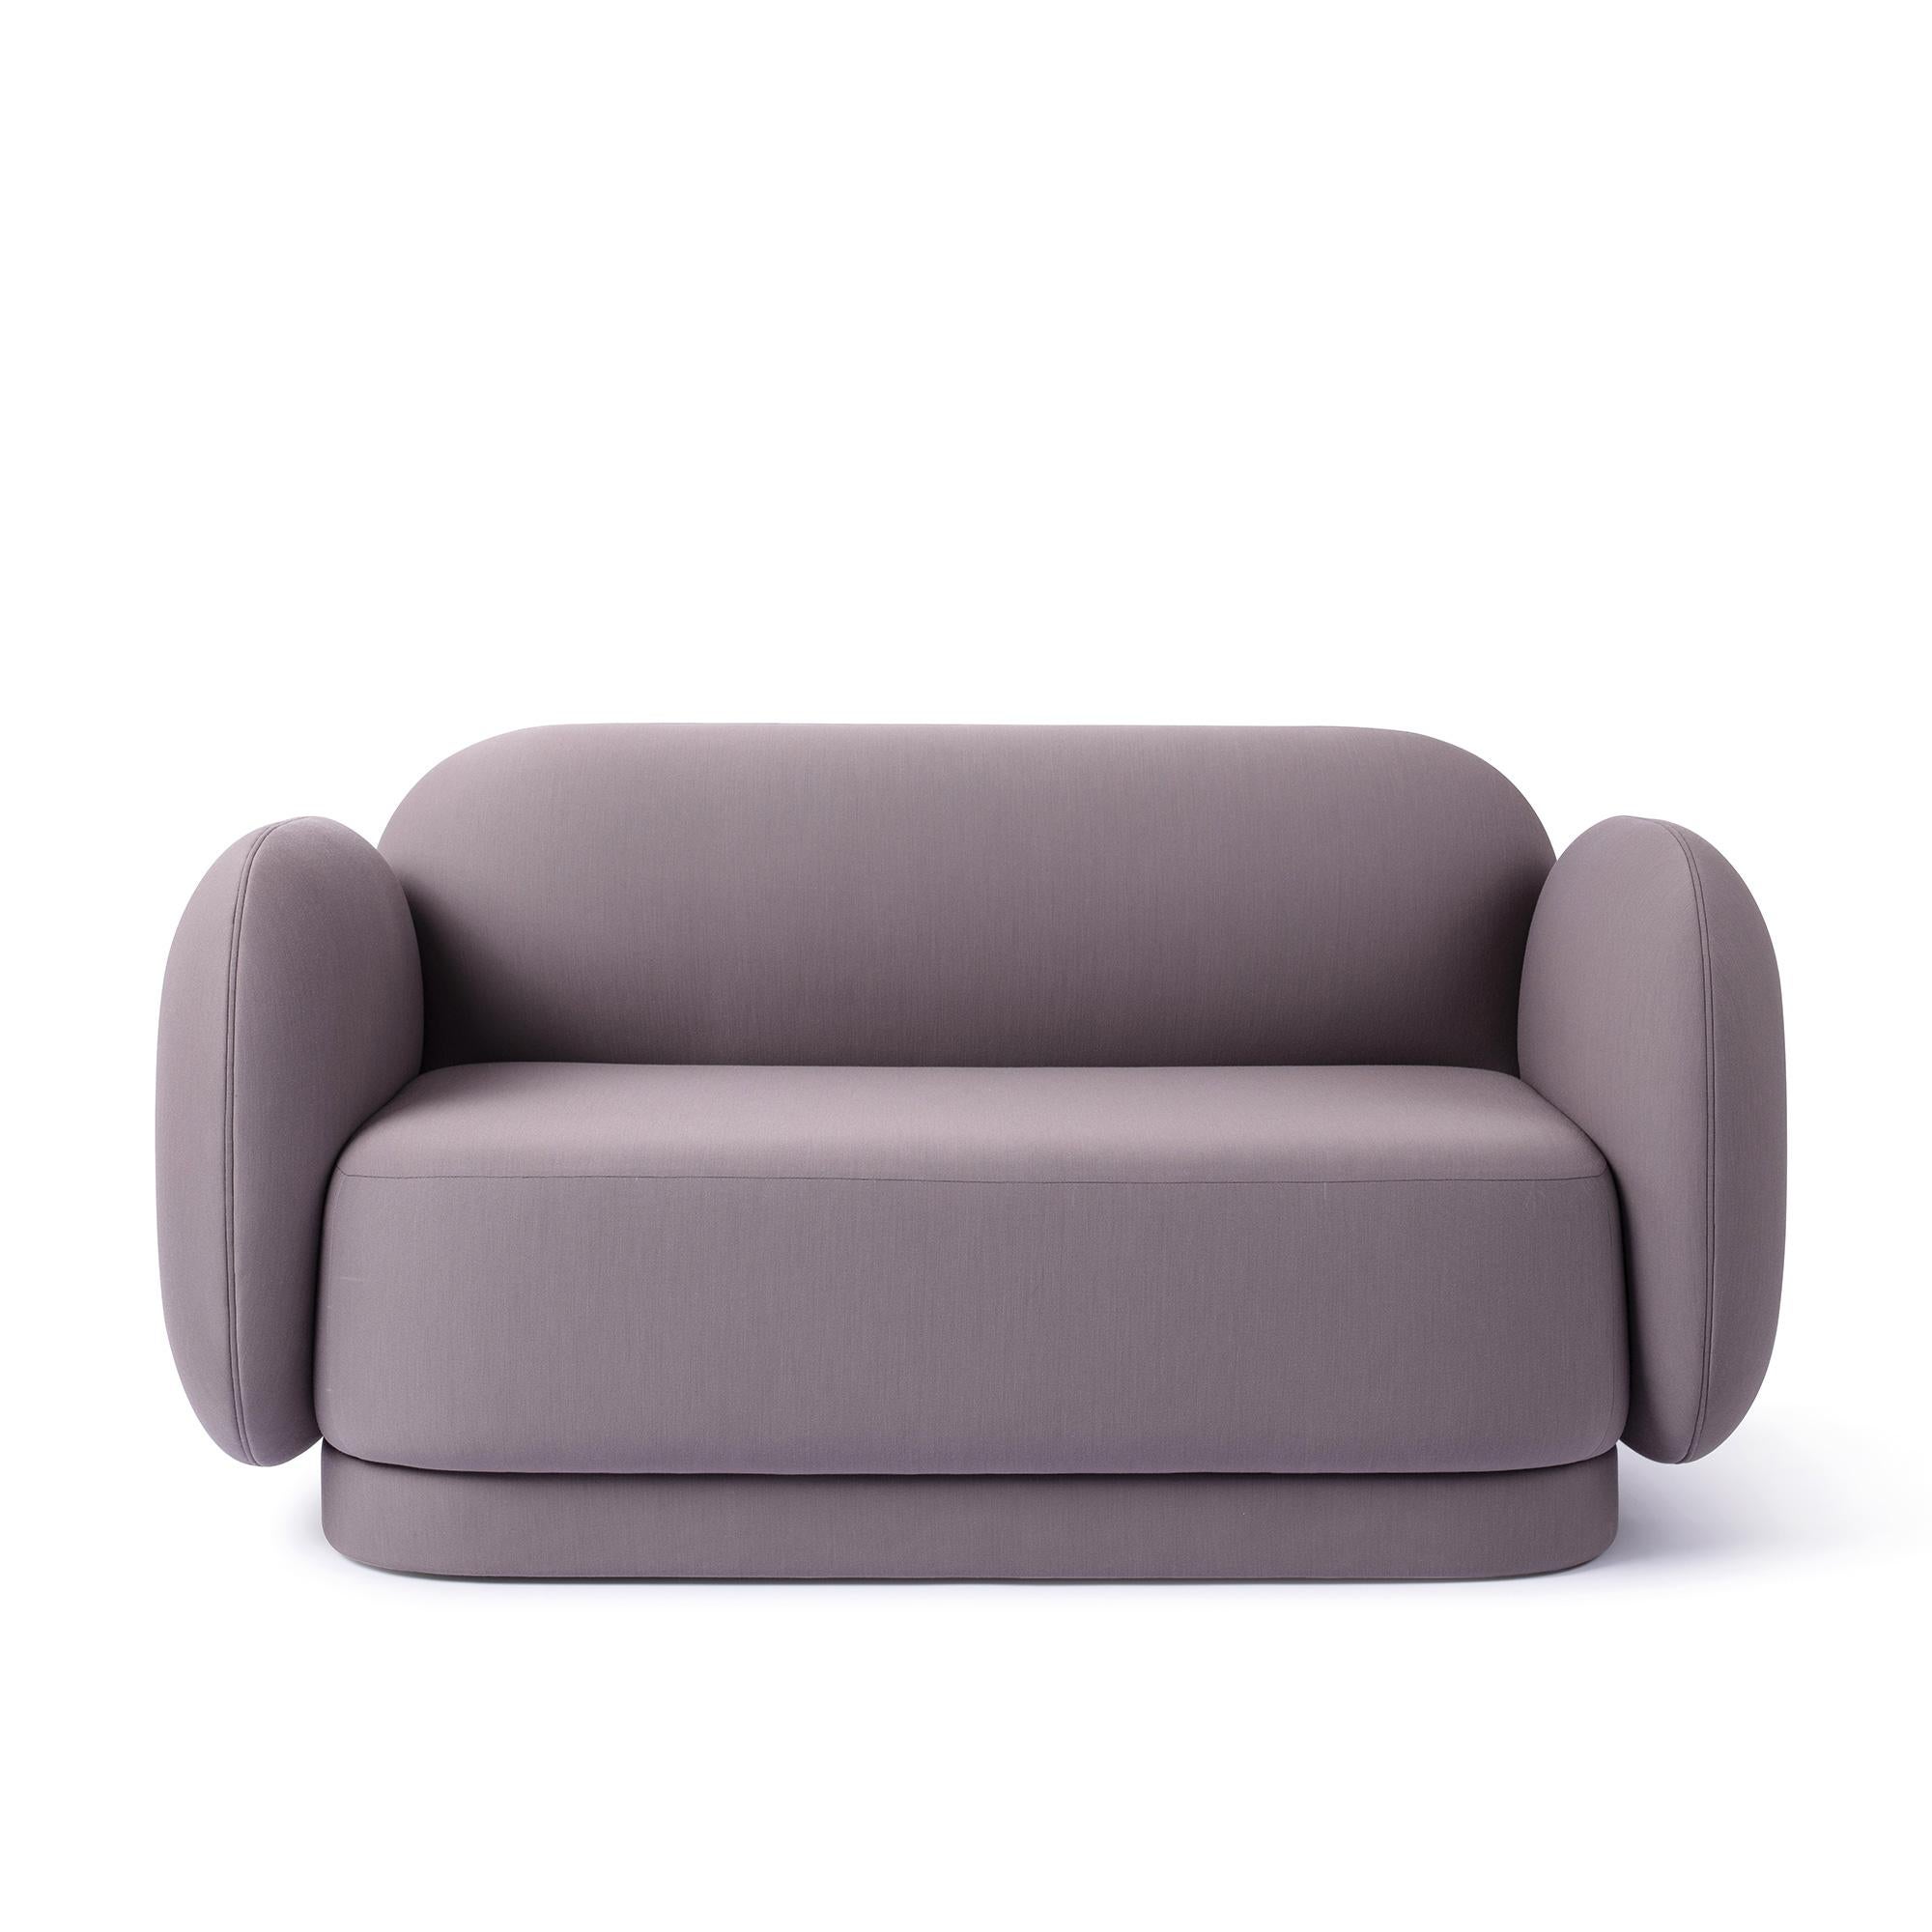 Two seater major Tom sofa designed by Thomas Dariel.
Dimensions: D 89 x W 174 x H 87 cm.
Materials: structure in solid timber and plywood. Memory foam base and seating fully upholstered in fabric.
Available in finishes: kvadrat premium